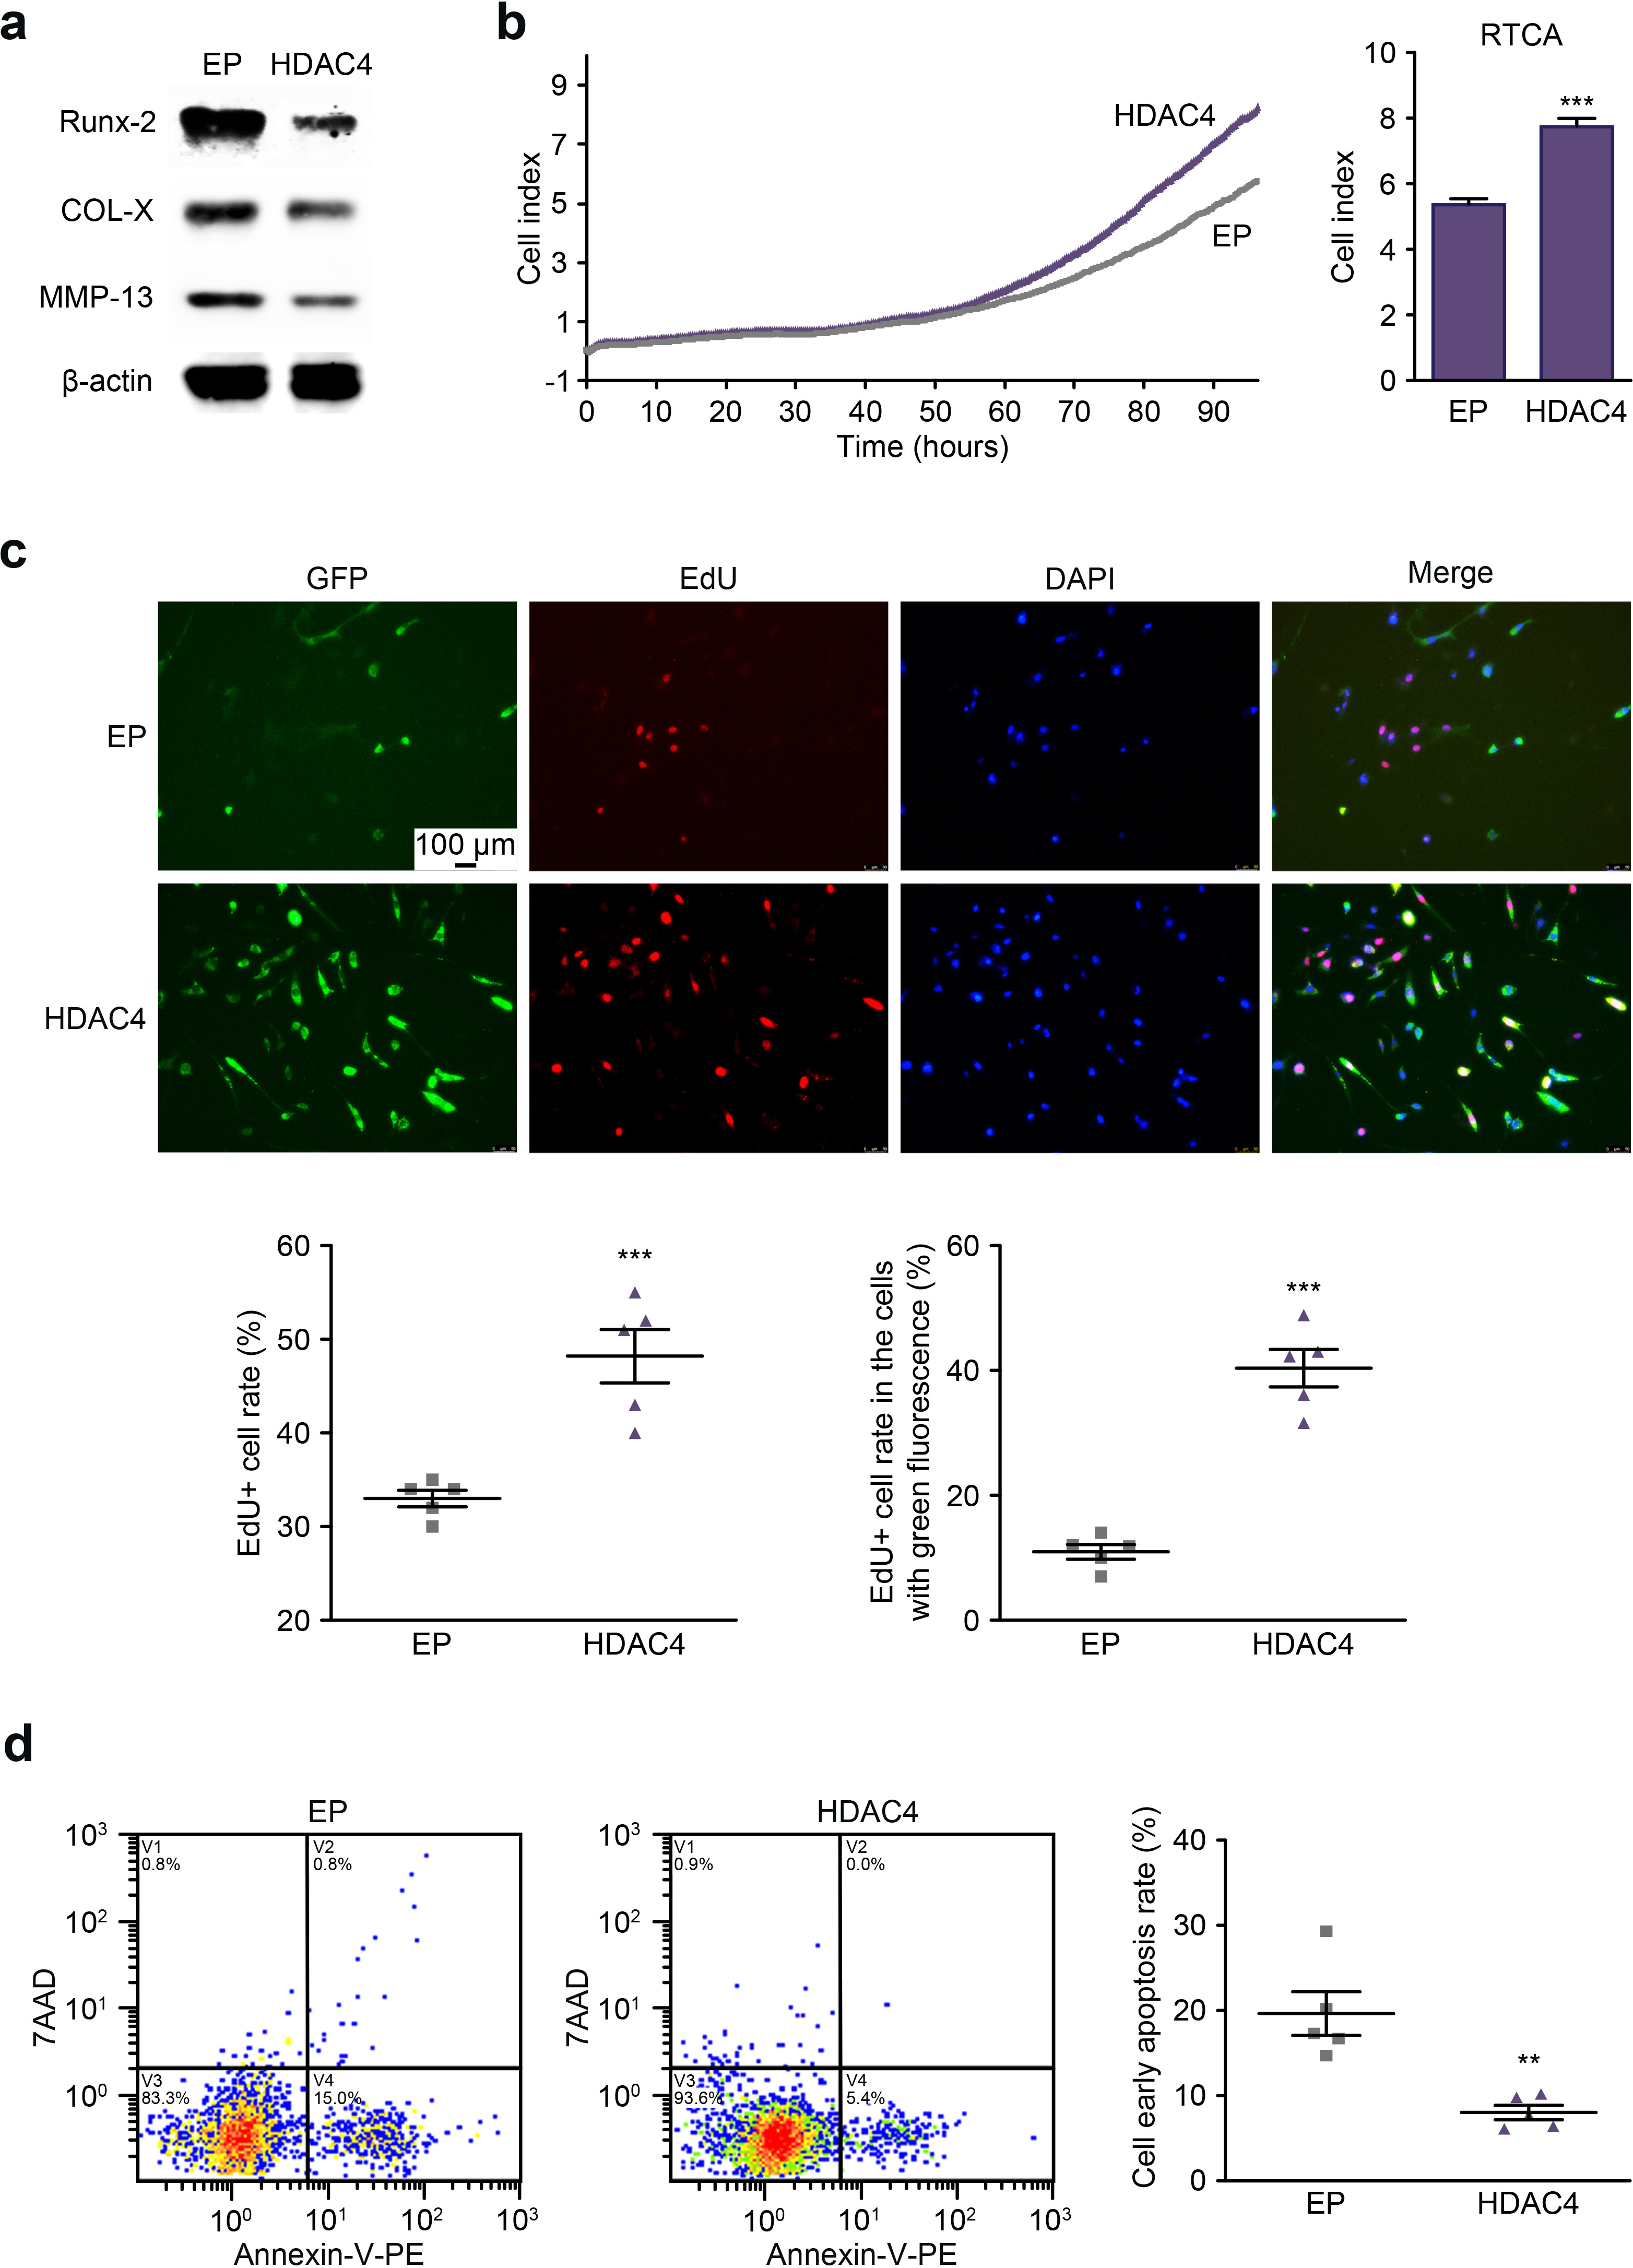 Fig. 2 
            Histone deacetylase 4 (HDAC4) markedly improves the survival rate and biofunction of chondrocytes. a) Representative protein expression levels of runt-related transcription factor 2 (RUNX2), type X collagen (Col-X), matrix metallopeptidase-13 (MMP-13), and β-actin in chondrocytes. b) Representative cell survival rates of groups were detected by real-time cell analysis (RTCA) assay; the HDAC4 group (purple) and the empty adenovirus (EP) group (grey), the data were quantified by mean cell index (CI) (n = 4). c) Representative EdU-based cell proliferation assay results. The EdU-positive cells showed red fluorescence. Scale bar: 50 μm. The percentage of EdU-positive cells in all cells and the percentage of EdU-positive cells in the cells with red fluorescence were quantified. d) Cell viability was detected by flow cytometry; of the four regions in the figure, zone V3 indicates negative 7-amino-actinomycin (7-AAD) and Annexin-V-phycoerythrin (PE) staining, showing the percentage of living cells, while zone V4 indicates negative 7-AAD staining and positive Annexin-V-PE staining, showing the percentage of early apoptosis cells. The data were quantified by the early apoptosis rate (n = 6). Data are expressed as the mean (standard deviation). ***p < 0.001. DAPI, 4′,6-diamidino-2-phenylindole; GFP, green fluorescent protein.
          